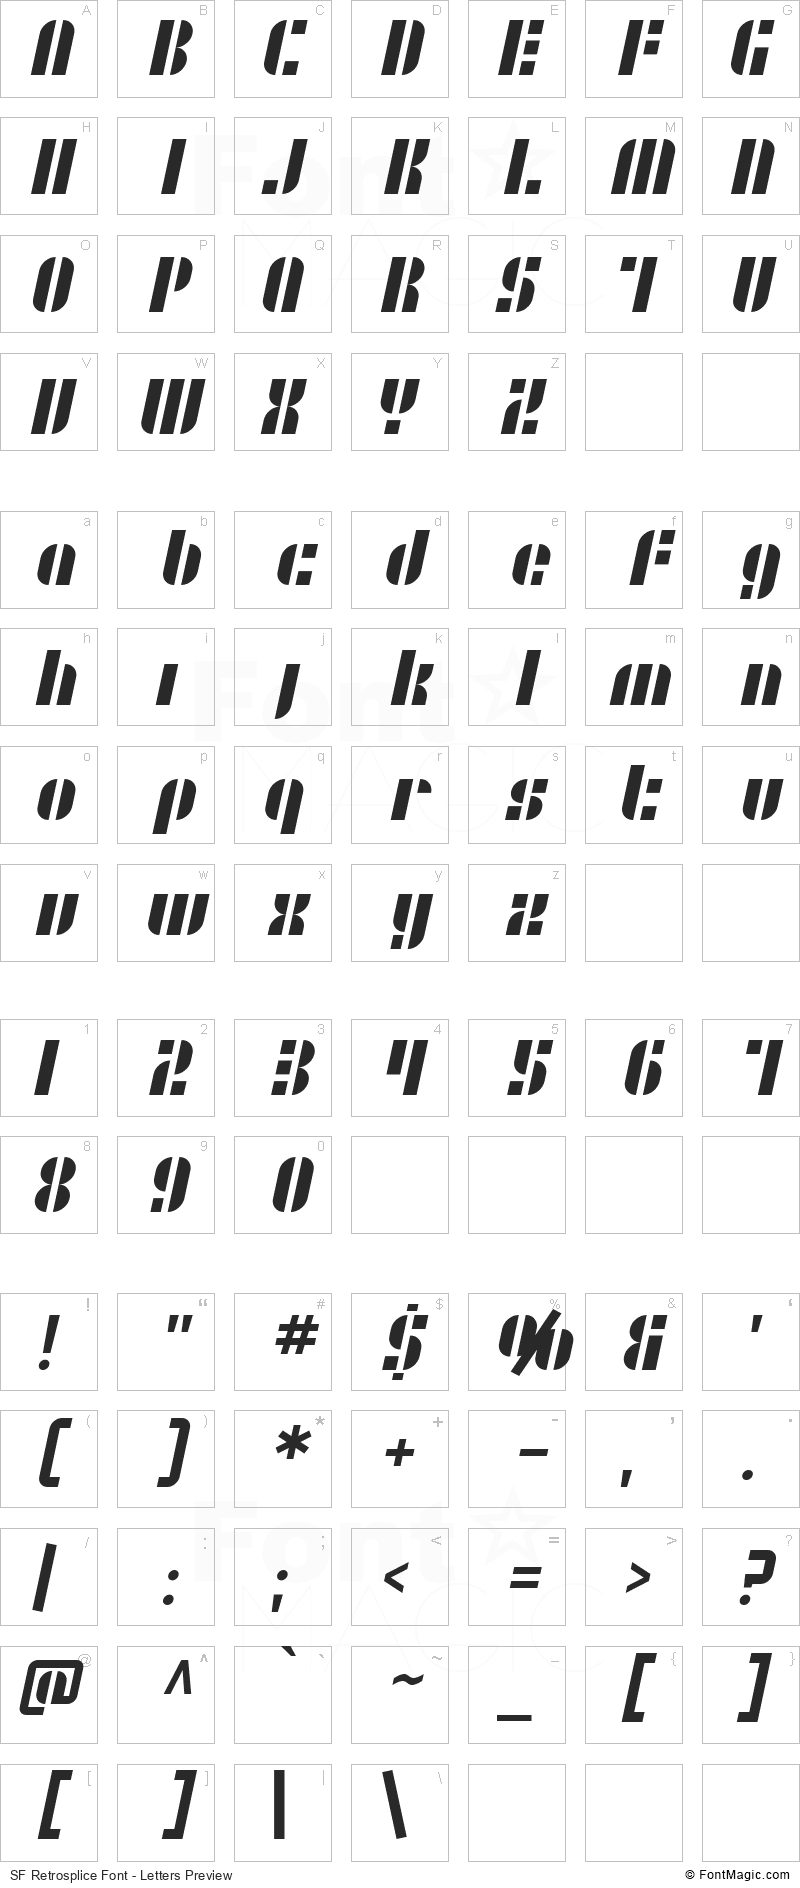 SF Retrosplice Font - All Latters Preview Chart